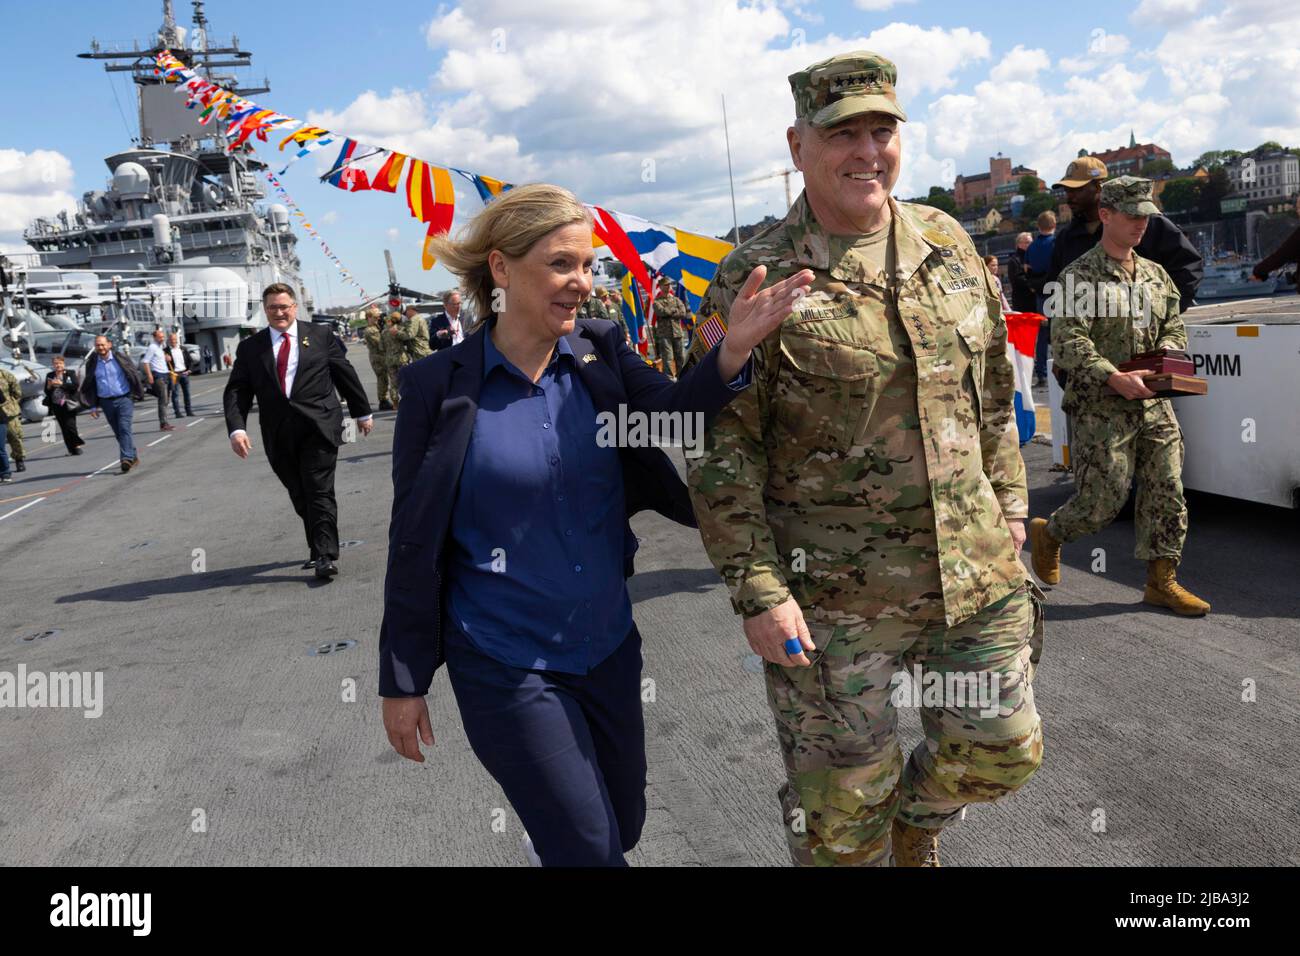 Swedish Prime Minister Magdalena Andersson (L) and US Chairman of the Joint Chiefs of Staff, General Mark Milley aboard the American amphibious warship USS Kearsarge in Stockholm, Sweden, on June 04, 2022, ahead of the Baltic Operations 'Baltops 22' exercise that will take place from June 5 to 17 in the Baltic Sea. Foto: Fredrik Persson / TT / kod 1081 Stock Photo